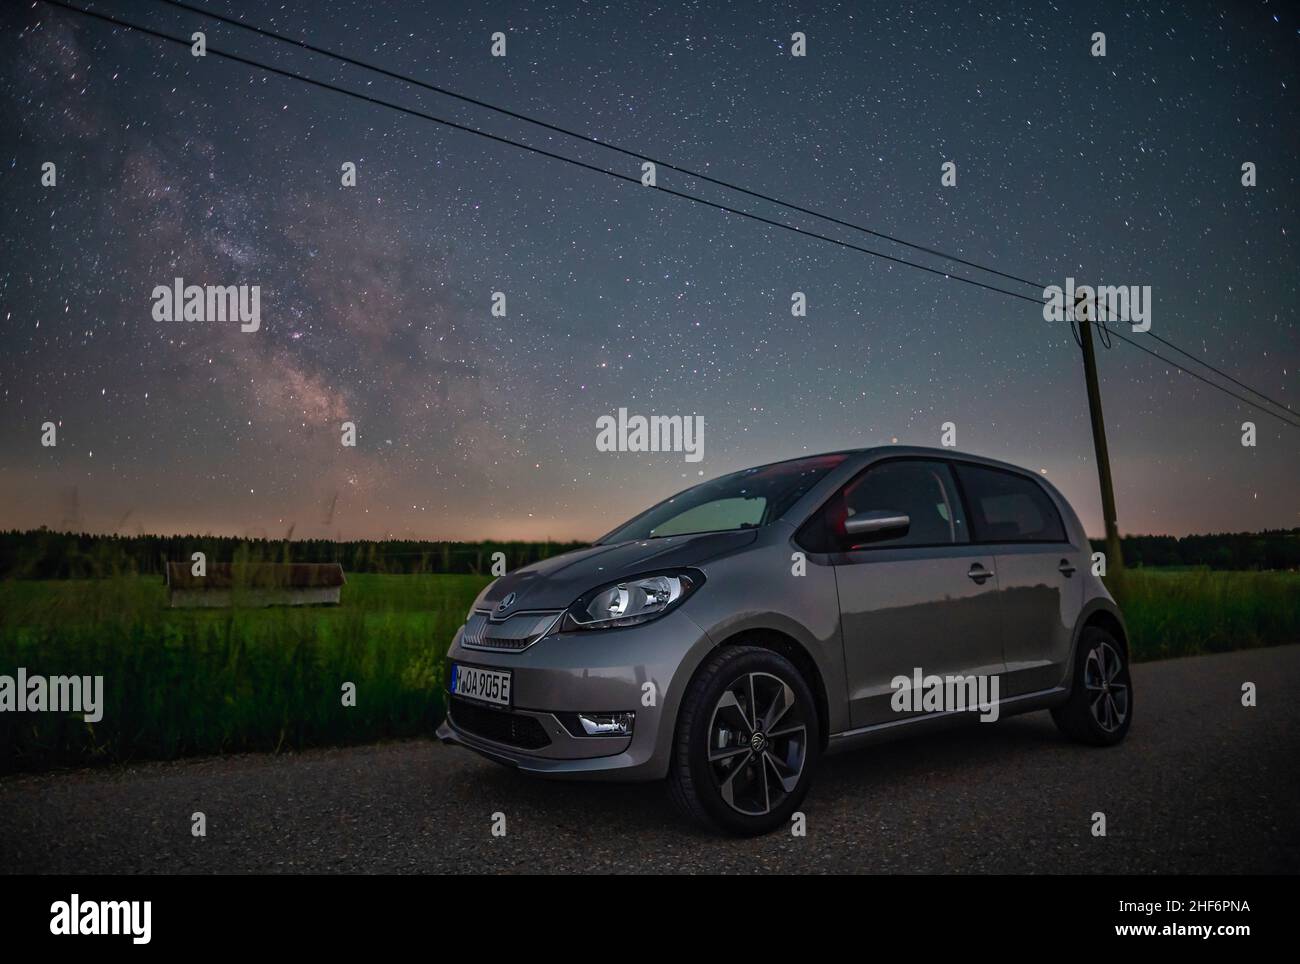 One booming new electric car at night in front of the milkyway,  concept for new innovations to save our environment Stock Photo